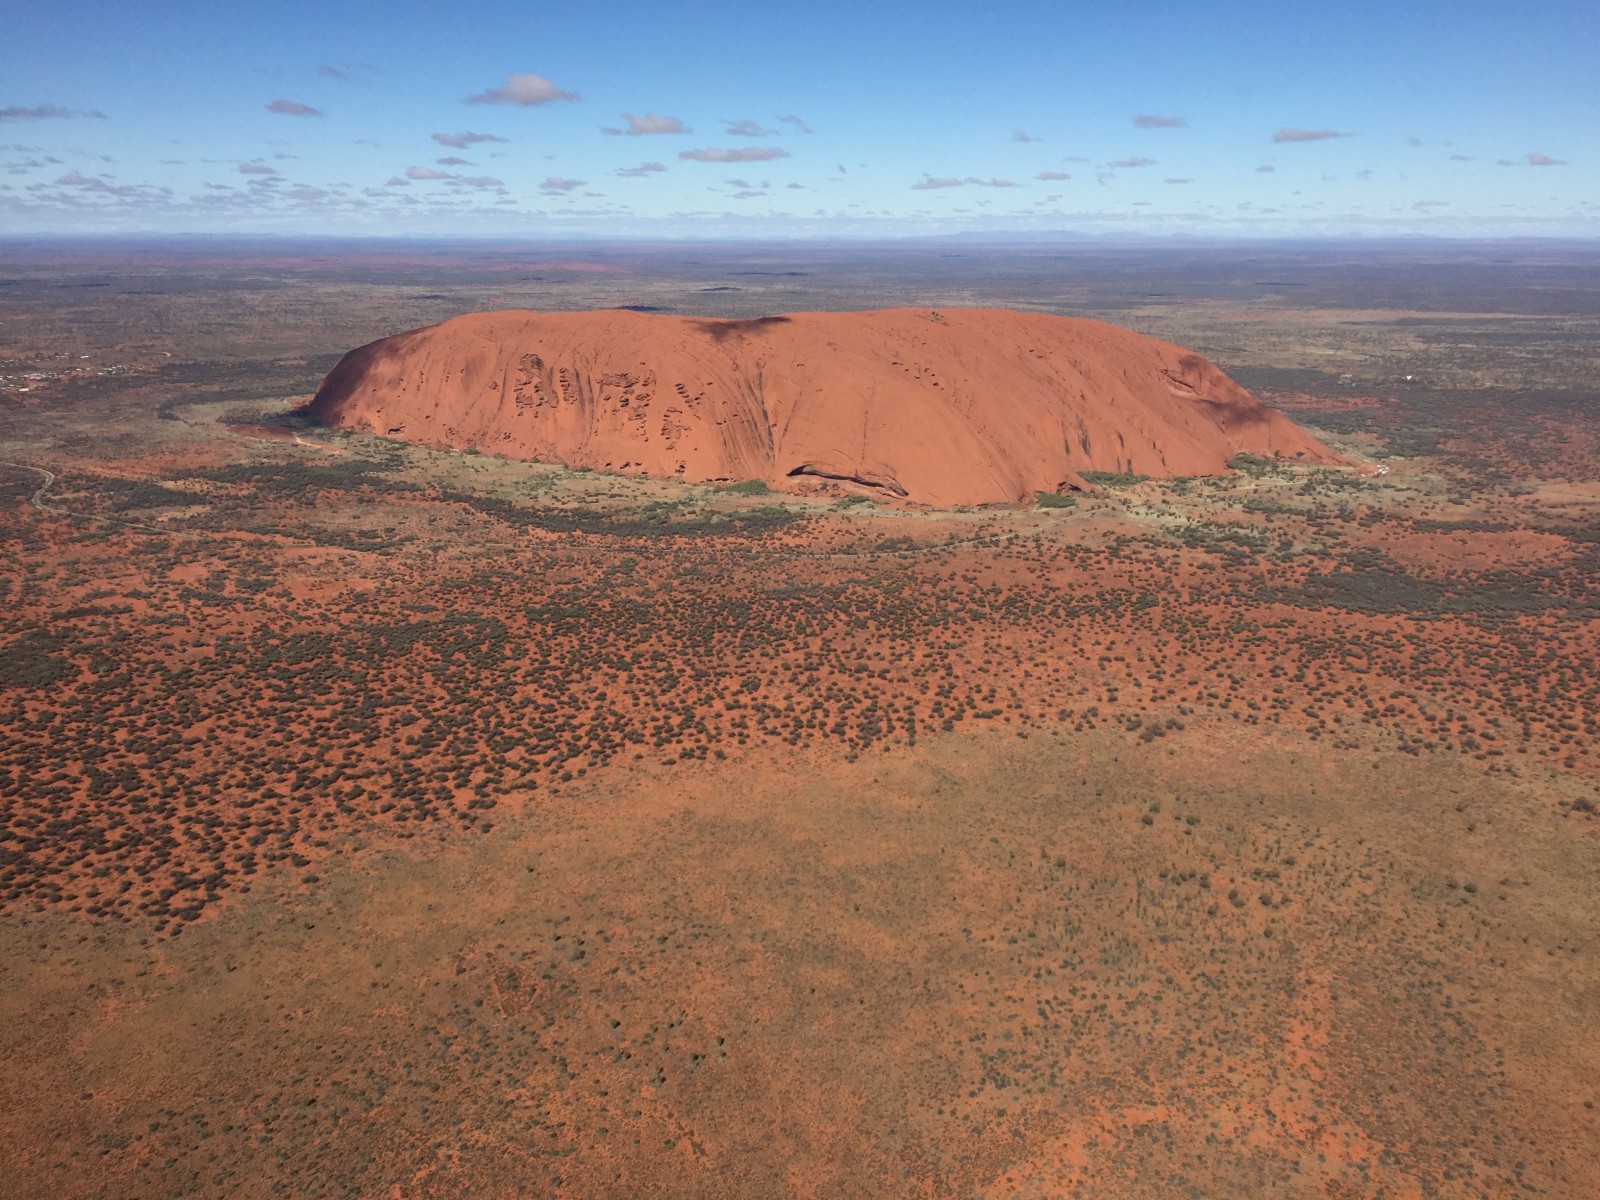 Australia’s Red Centre As Seen From a Helicopter Ride over Uluru – My